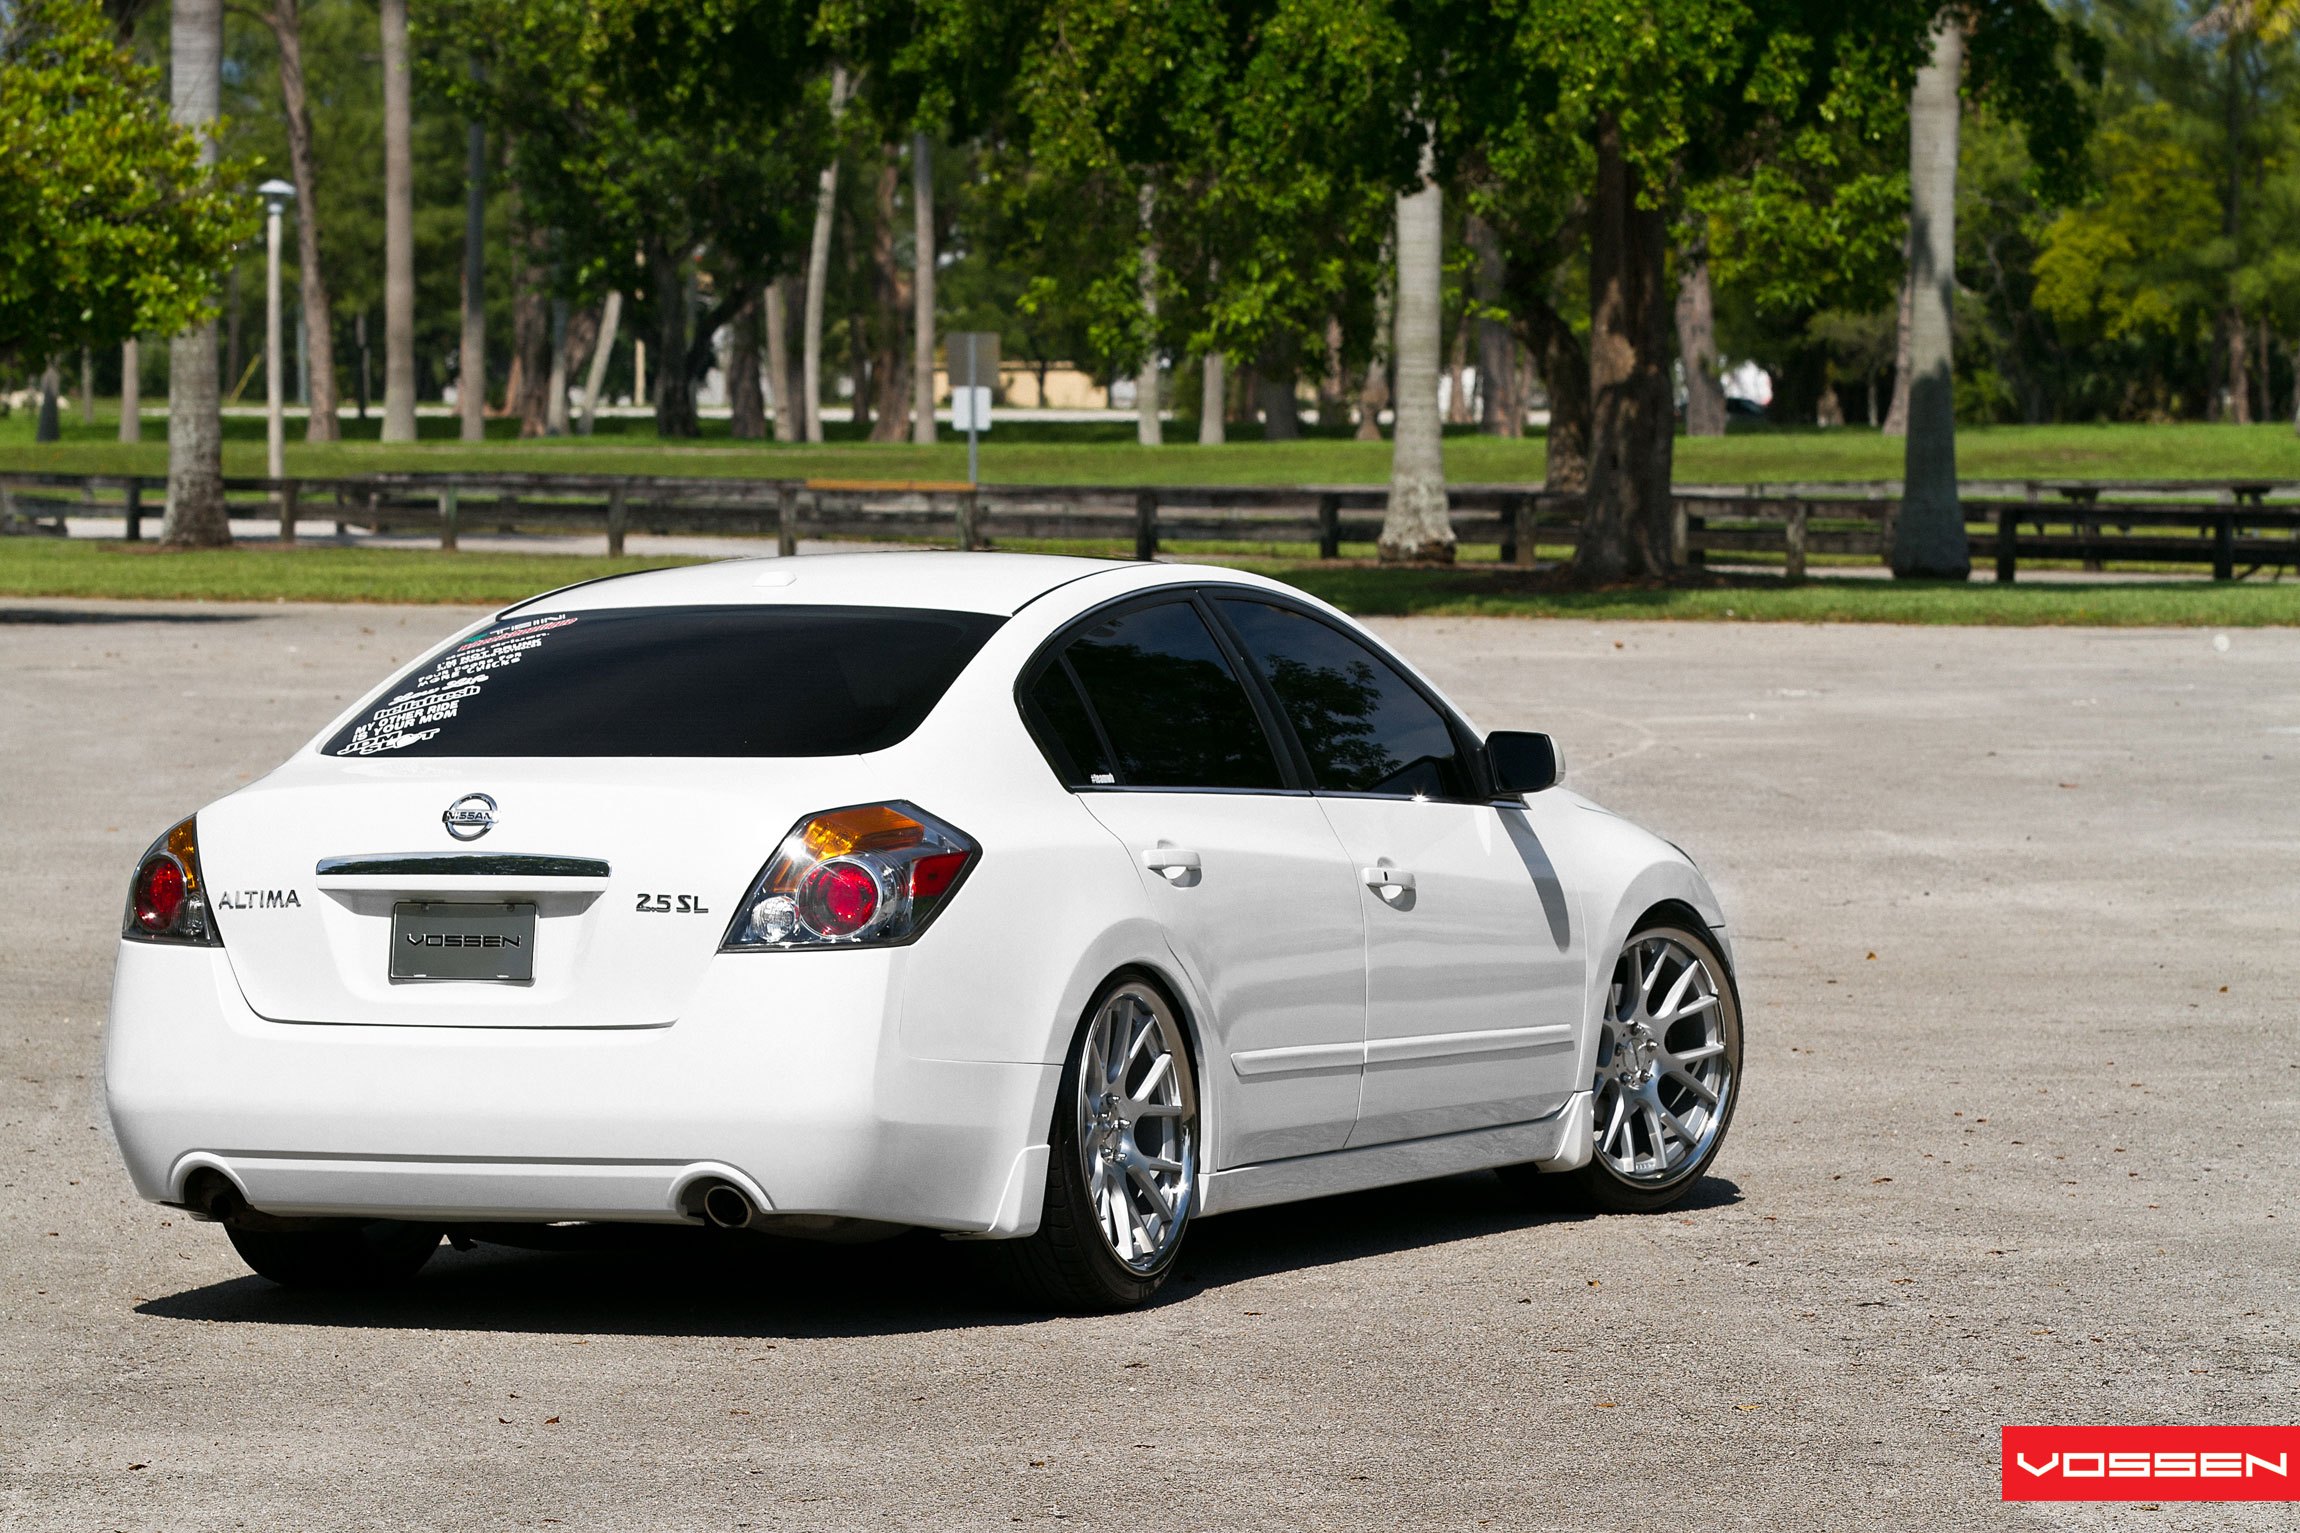 Aftermarket Taillights on White Debadged Nissan Altima - Photo by Vossen